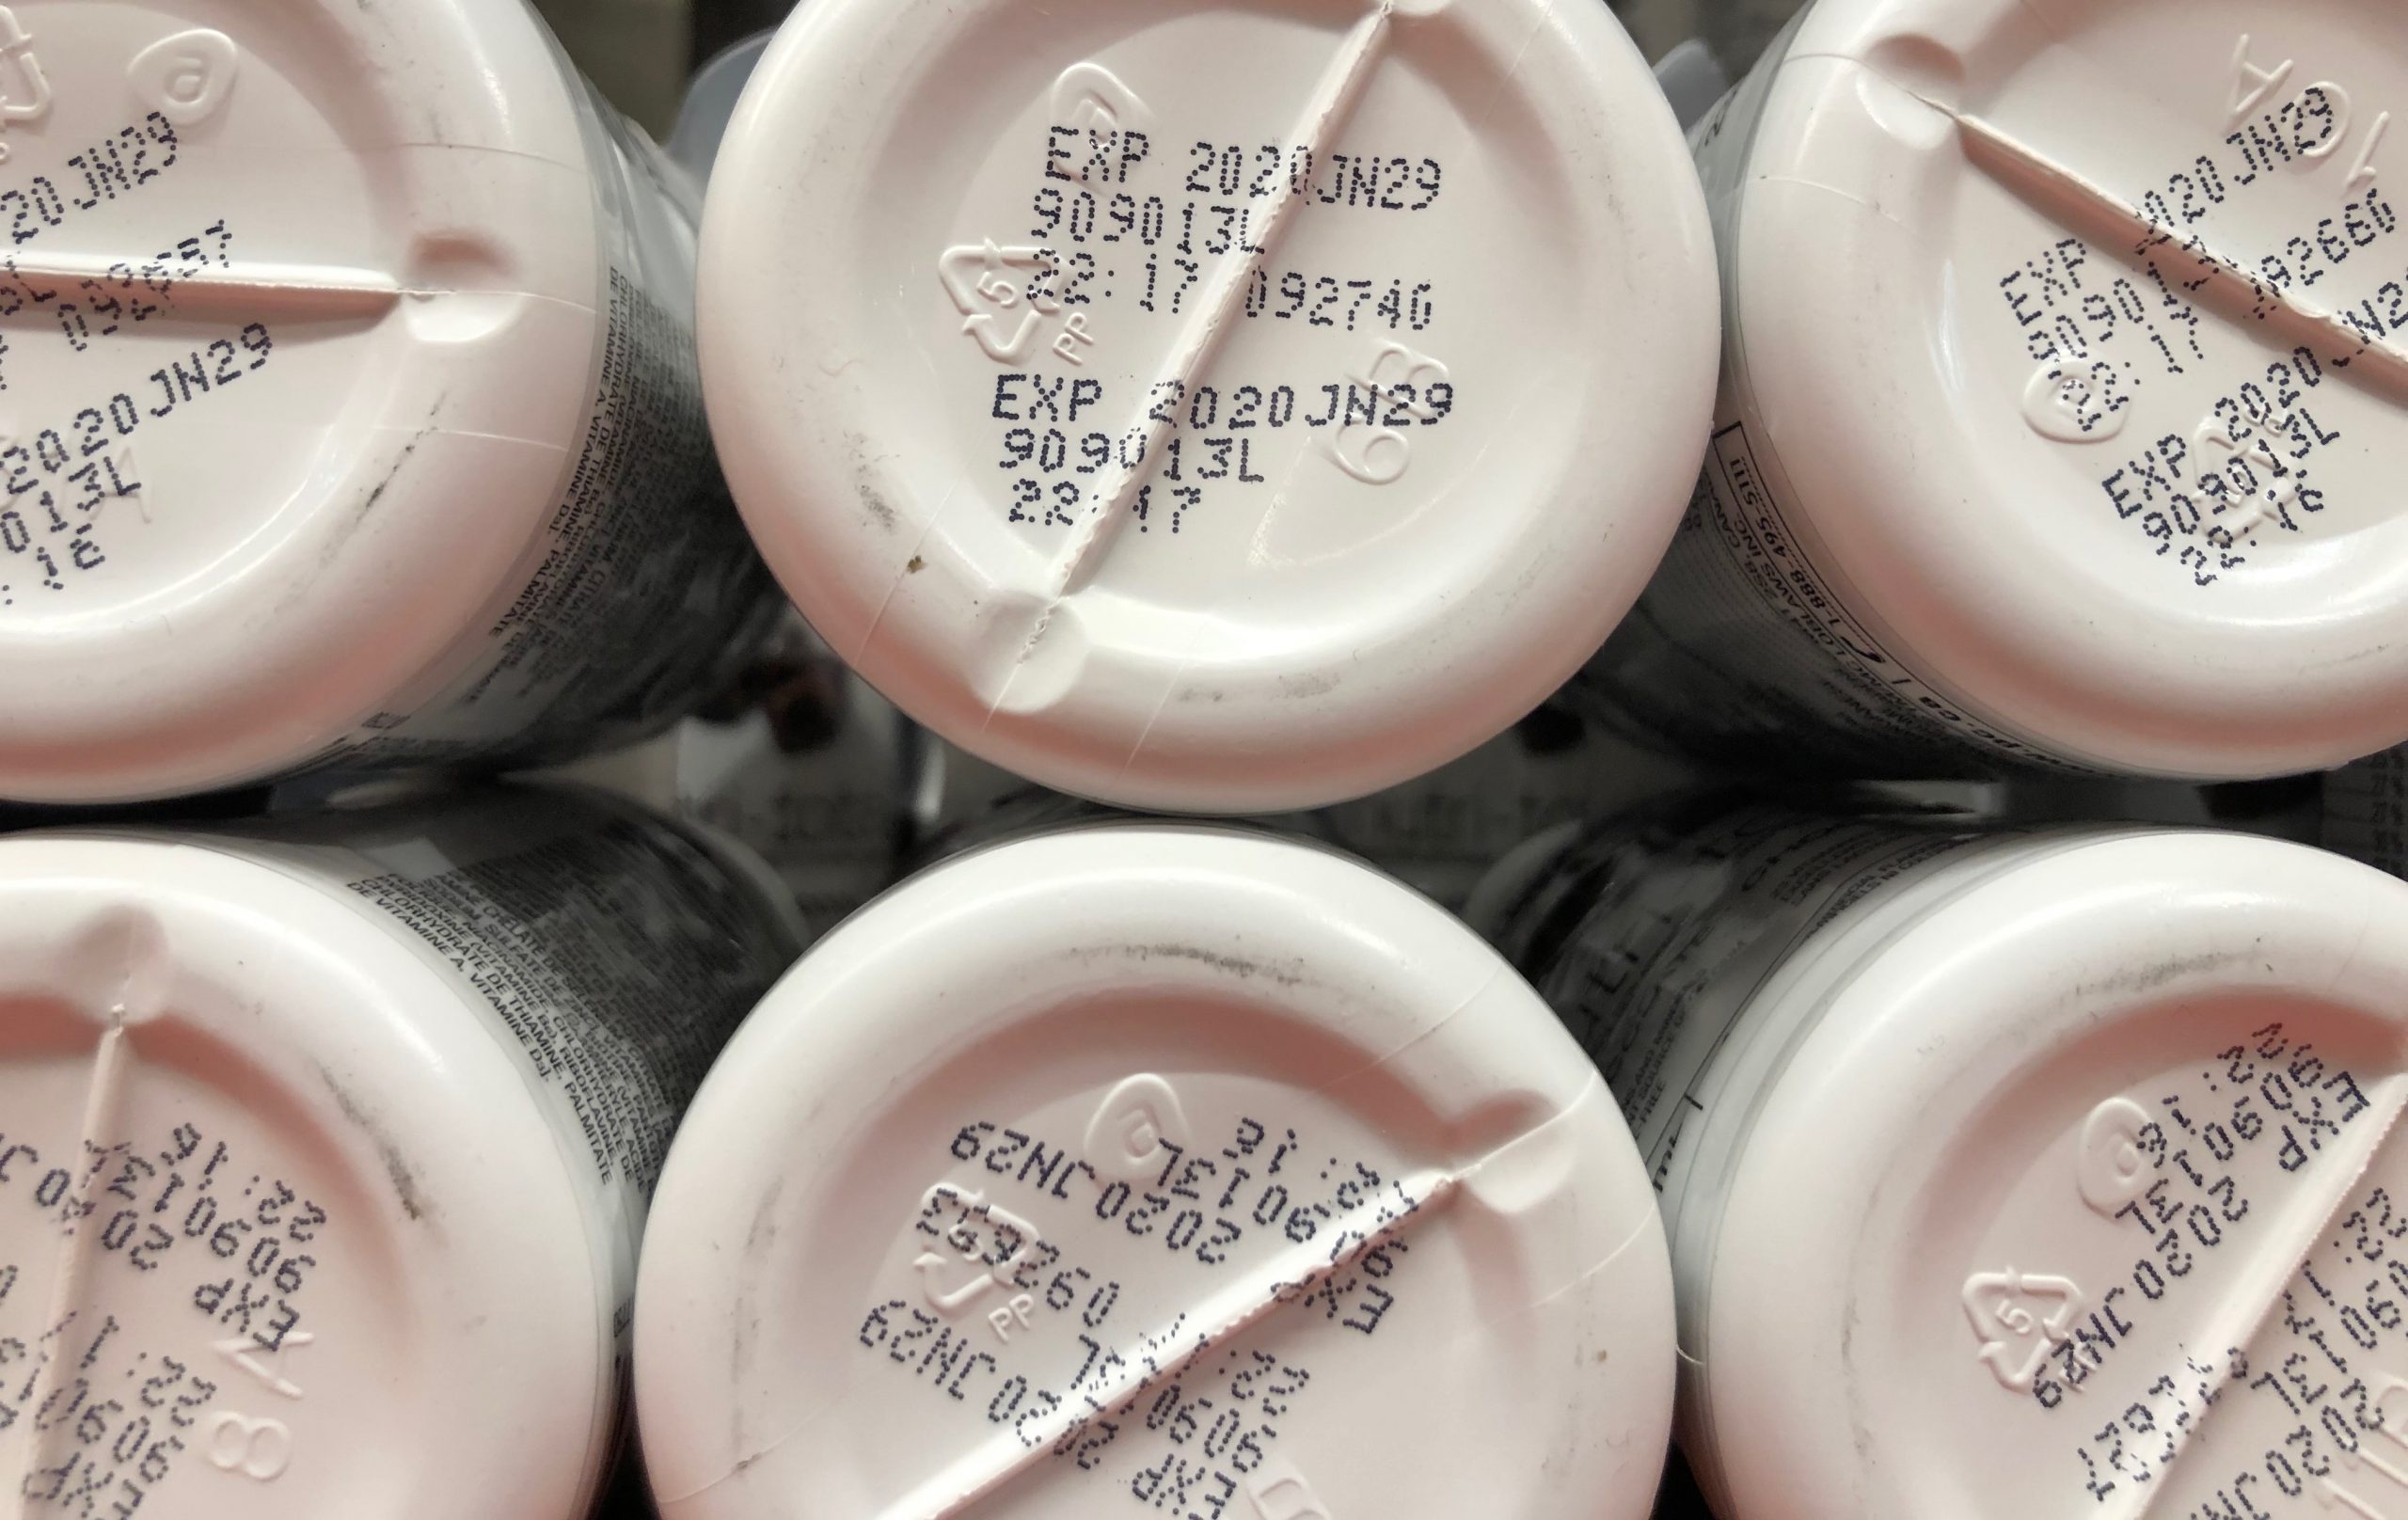 Best Before and Expiry Dates Food Labelling